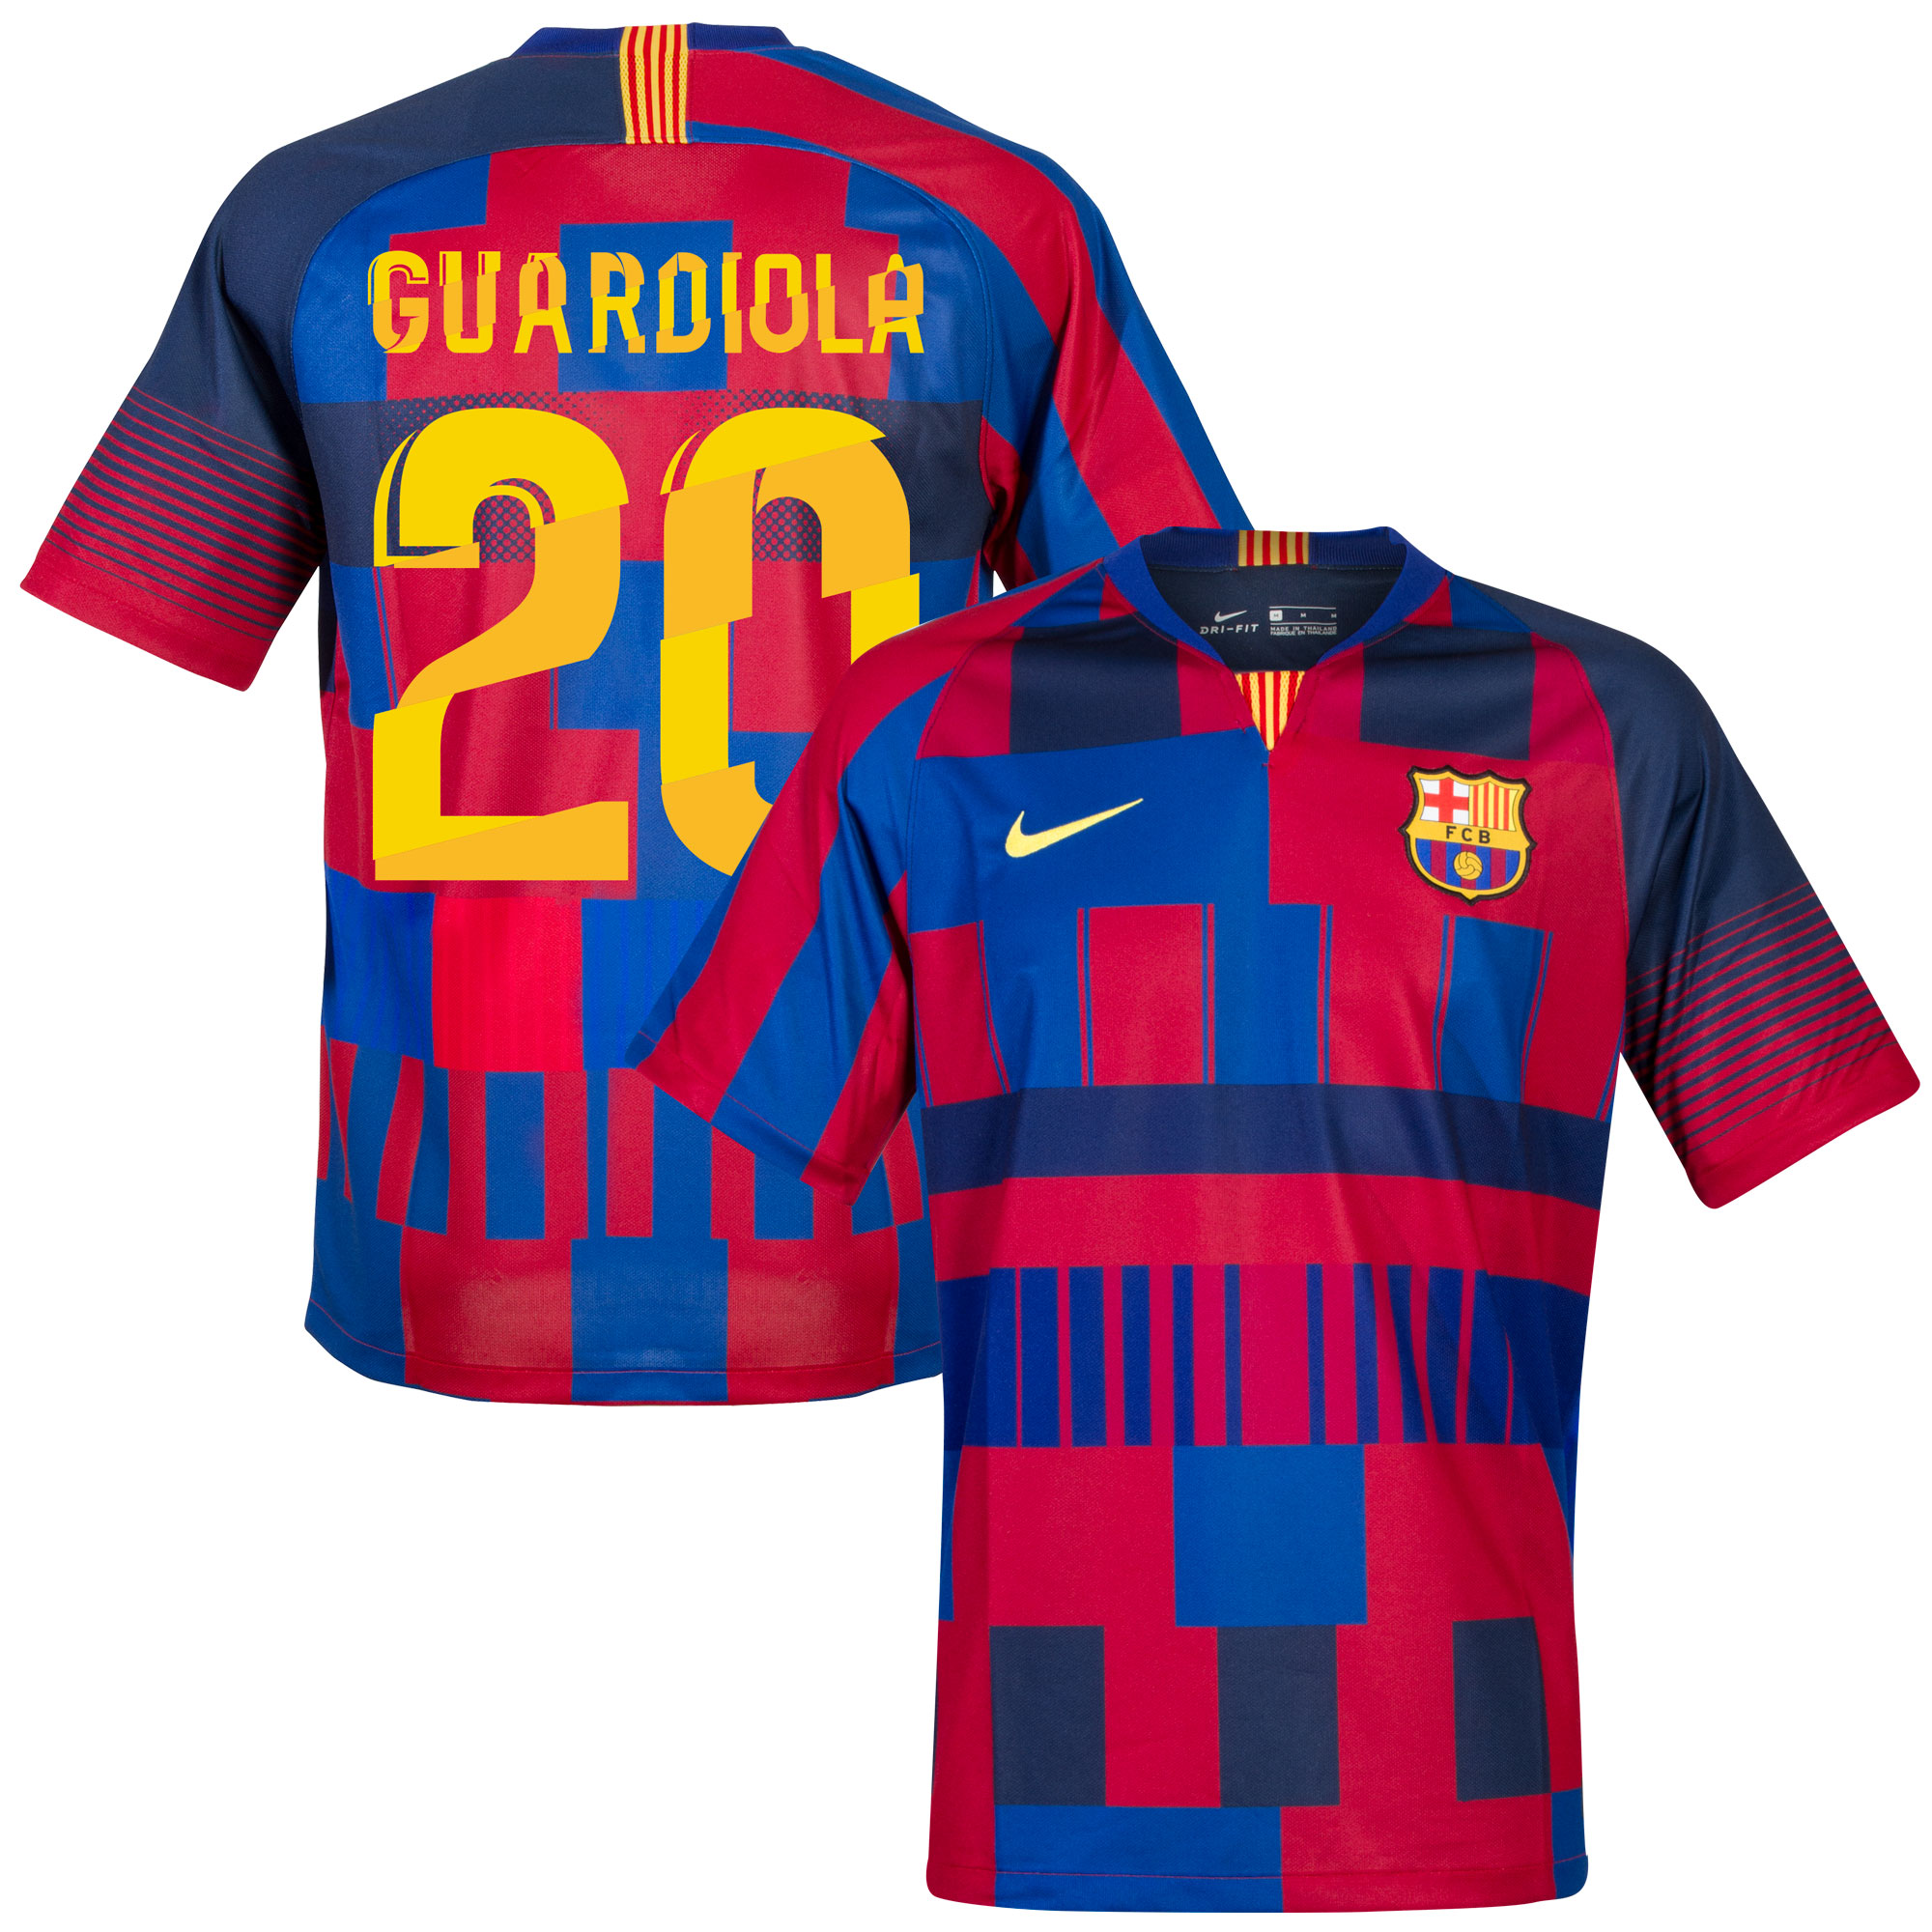 Barcelona x Nike 20th Anniversary Voetbalshirt + Guardiola 20 (Special Edition Fan Style Printing) S